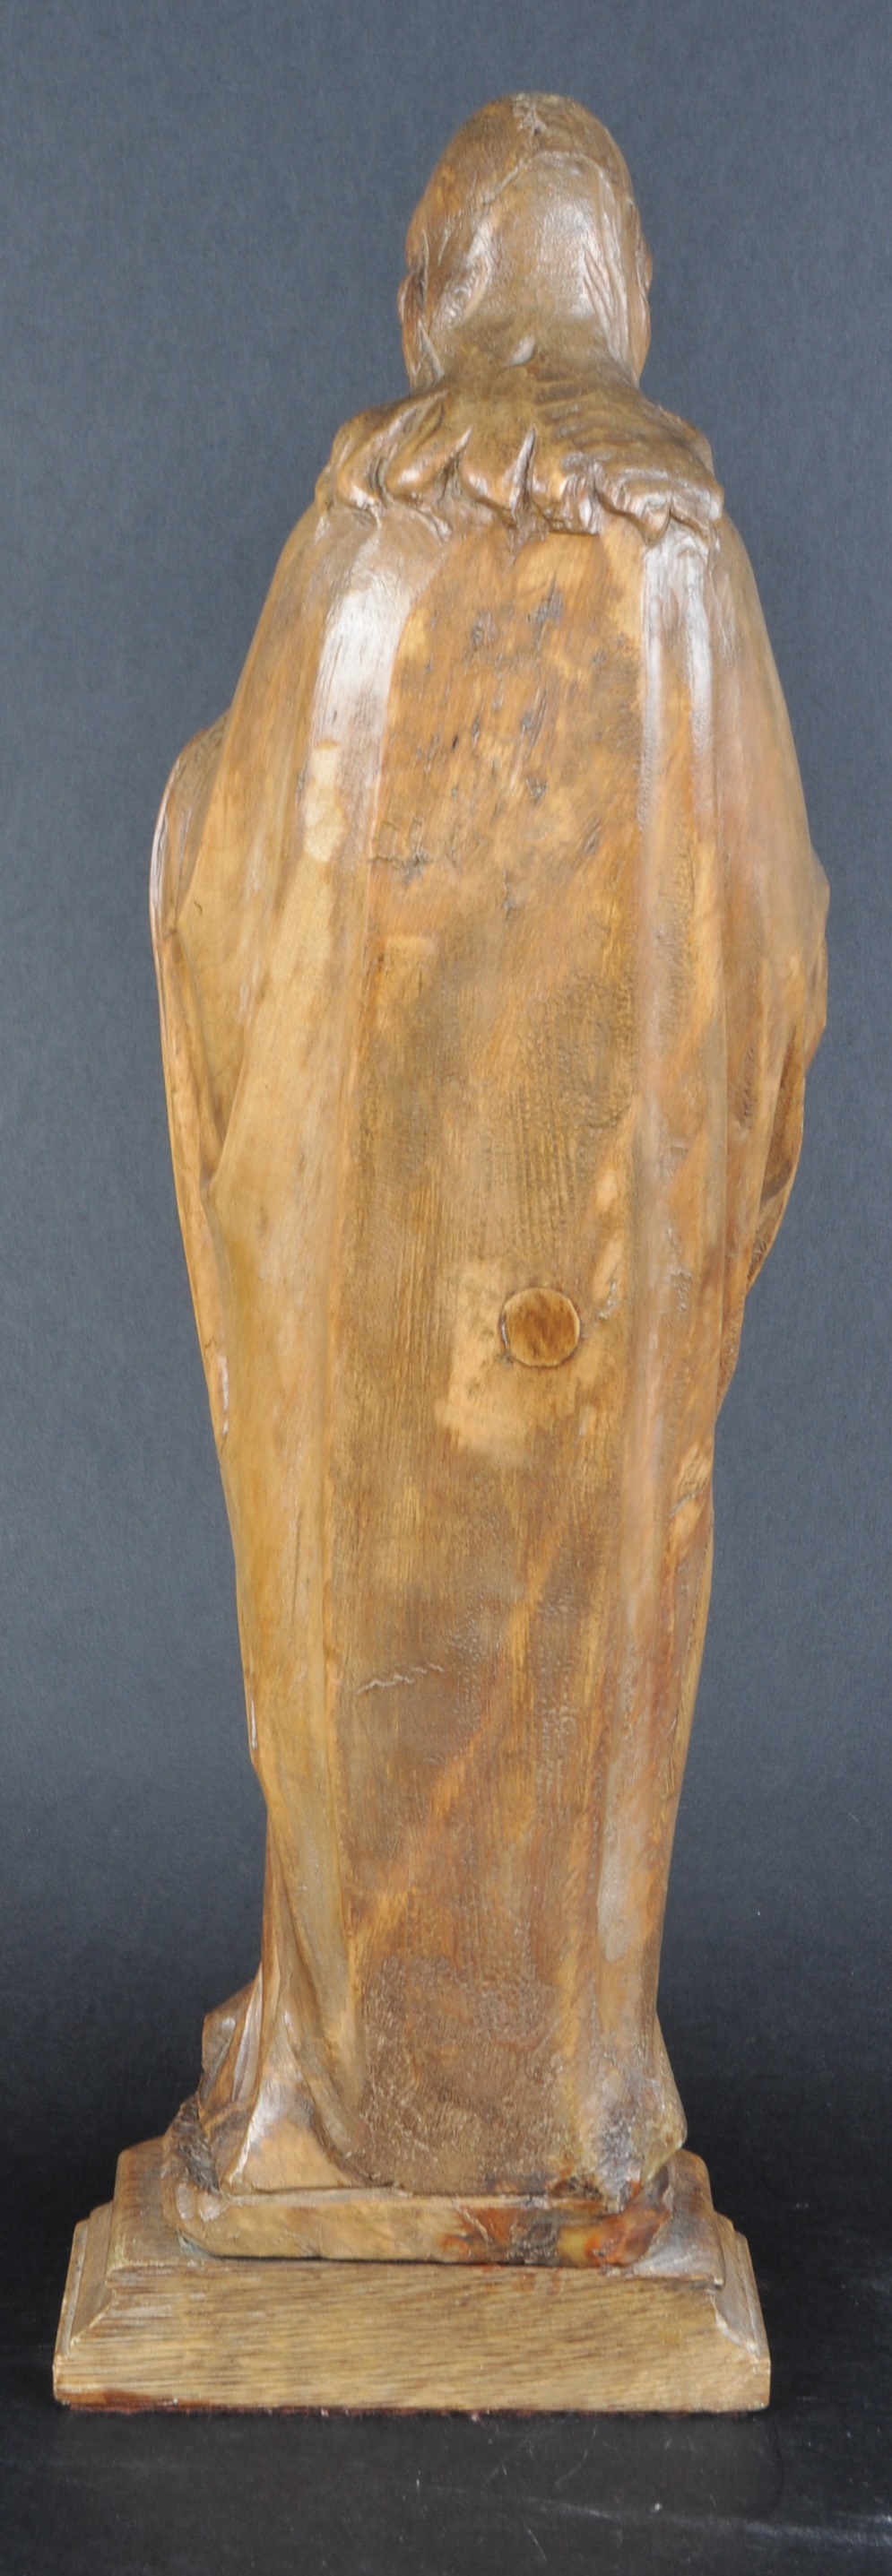 LARGE WALNUT CARVING OF THE VIRGIN MARY - Image 6 of 7